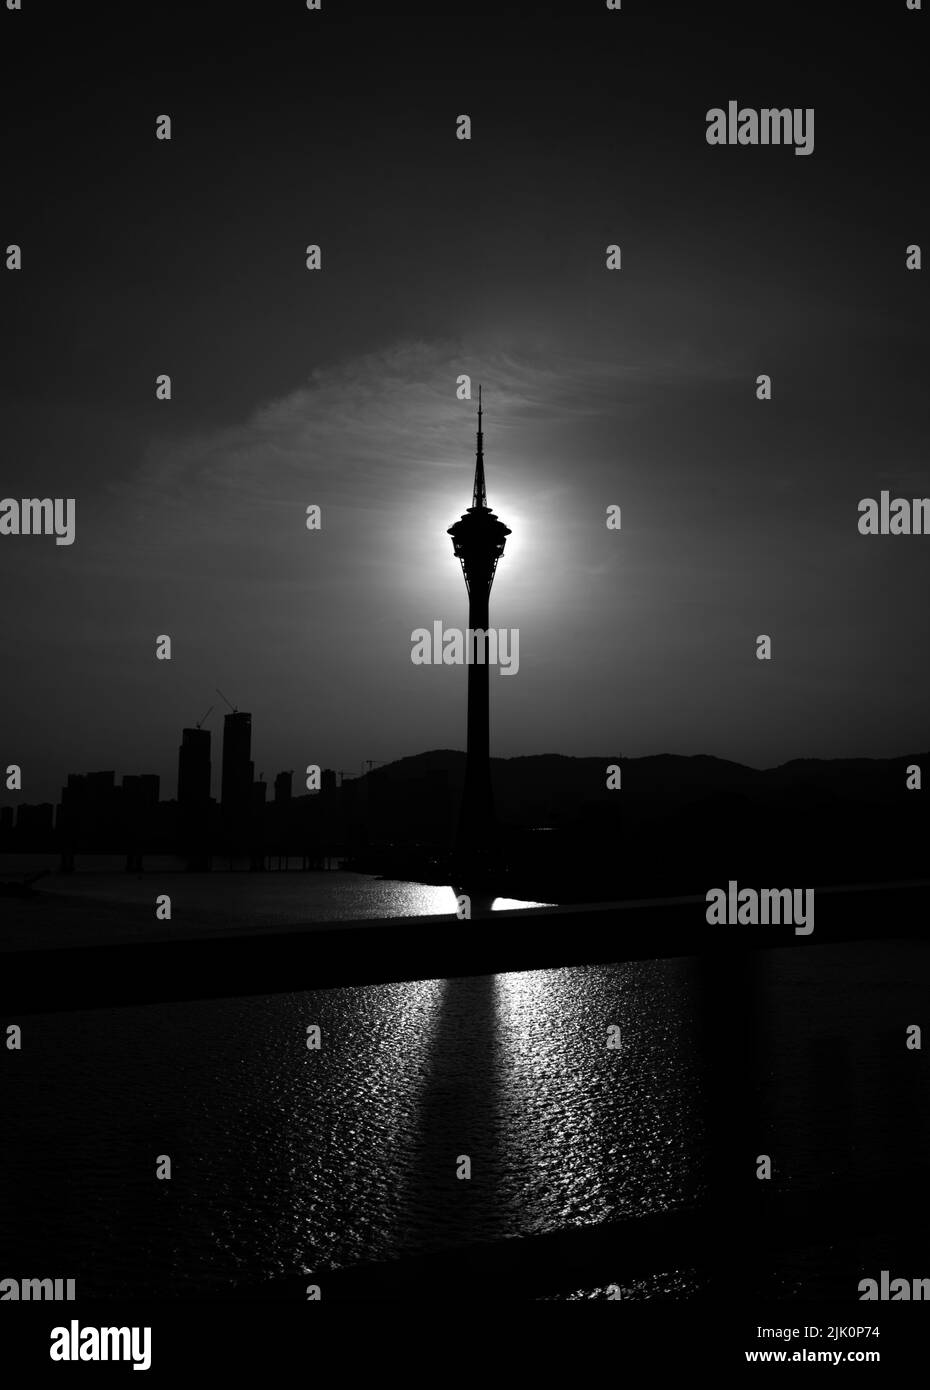 A breathtaking view of the silhouette of Milad Tower against dark cloudy night sky Stock Photo